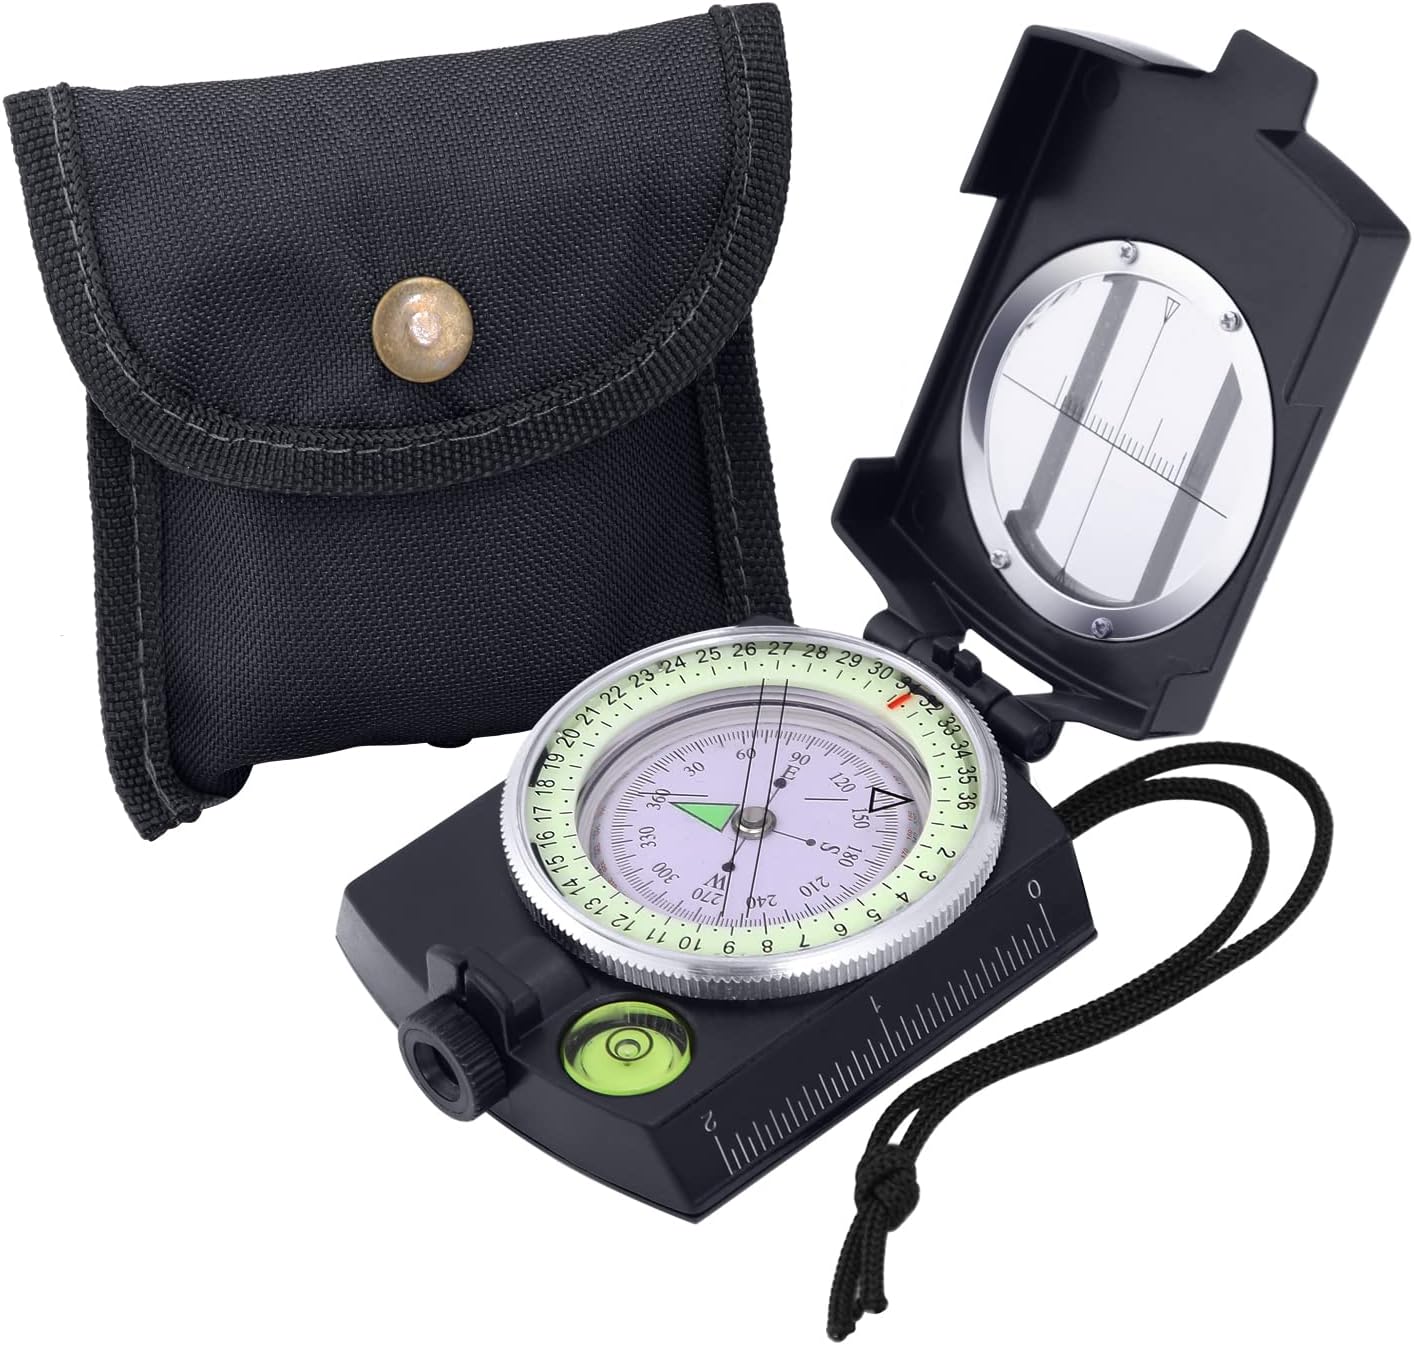 Hseok Military Lensatic Sighting Compass, Compass Survival Tactical Compass Backpacking Compass Compact Handheld Compass with Carry Bag, Waterproof Boy Scout Compass for Hiking Camping Hunting Outdoor